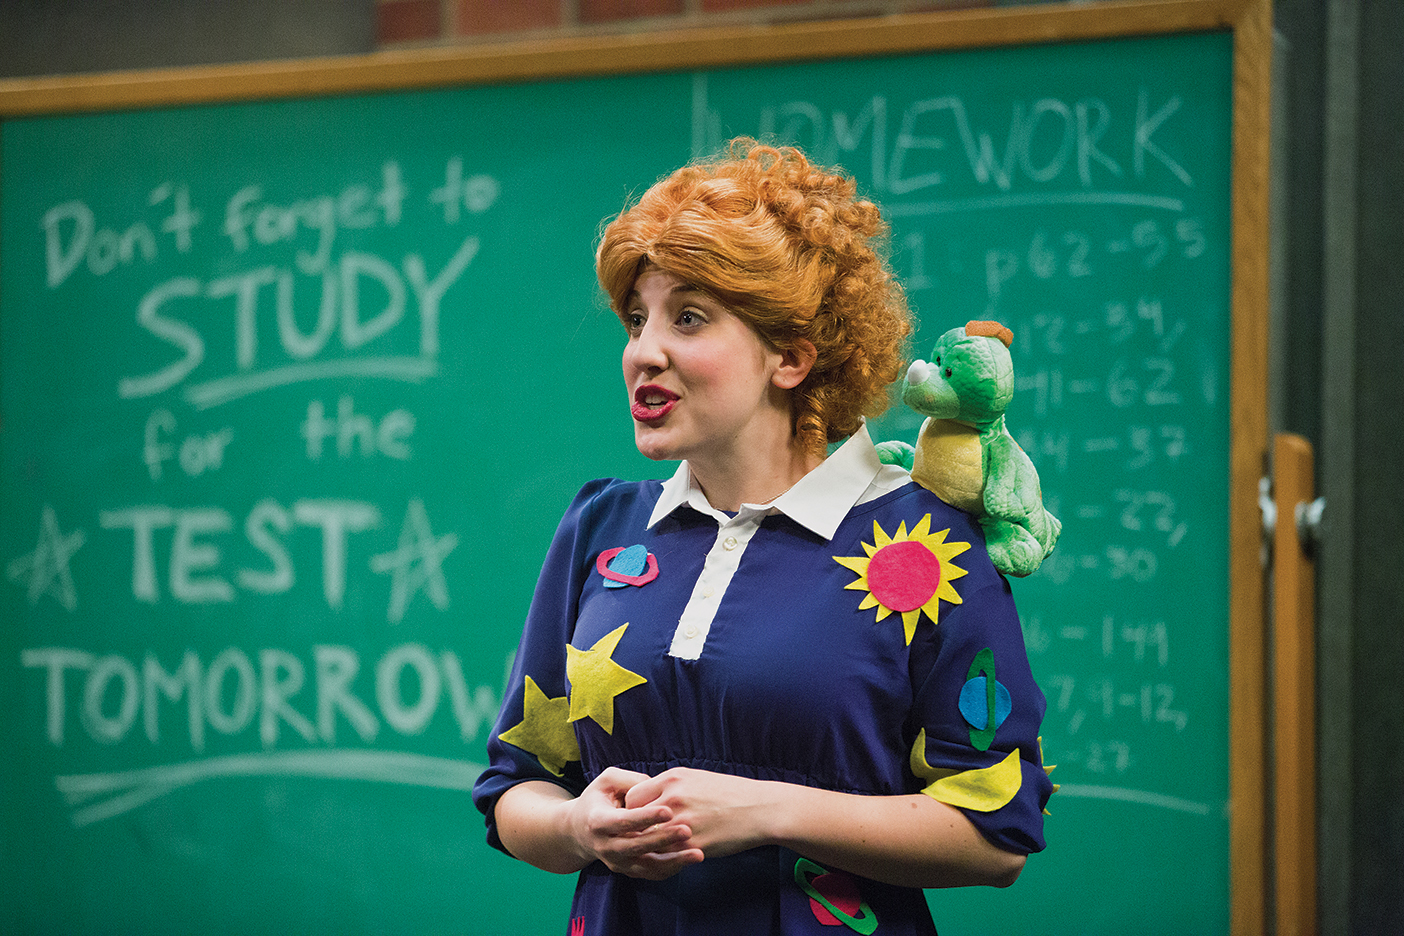 a cast member dressed as Mrs. Frizzle from The Magic School Bus